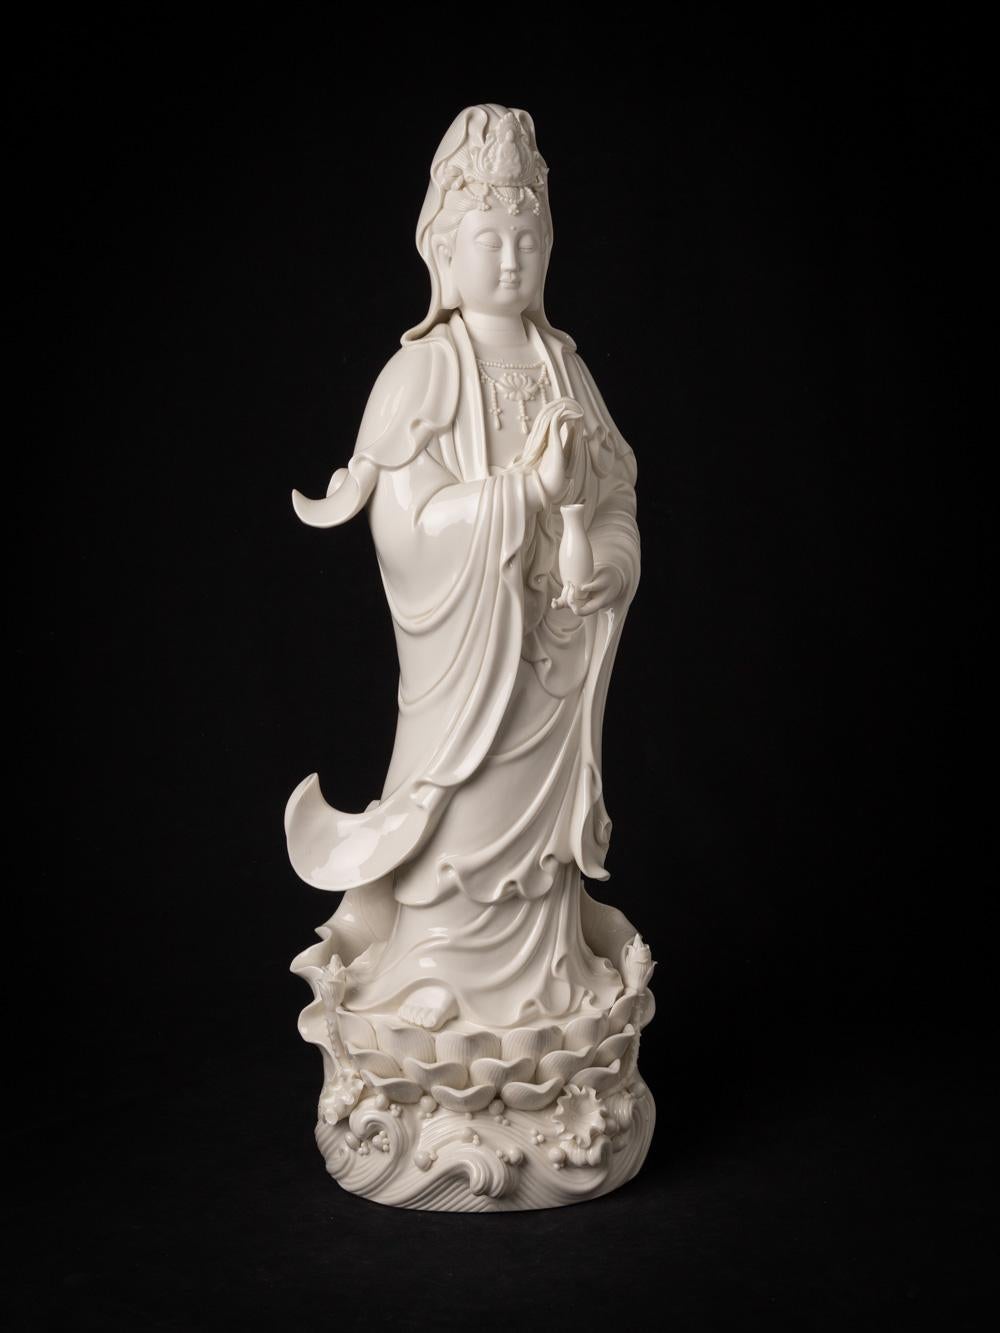 Porcelain Beautiful and detailed porcelain Guan Yin statue originated from China